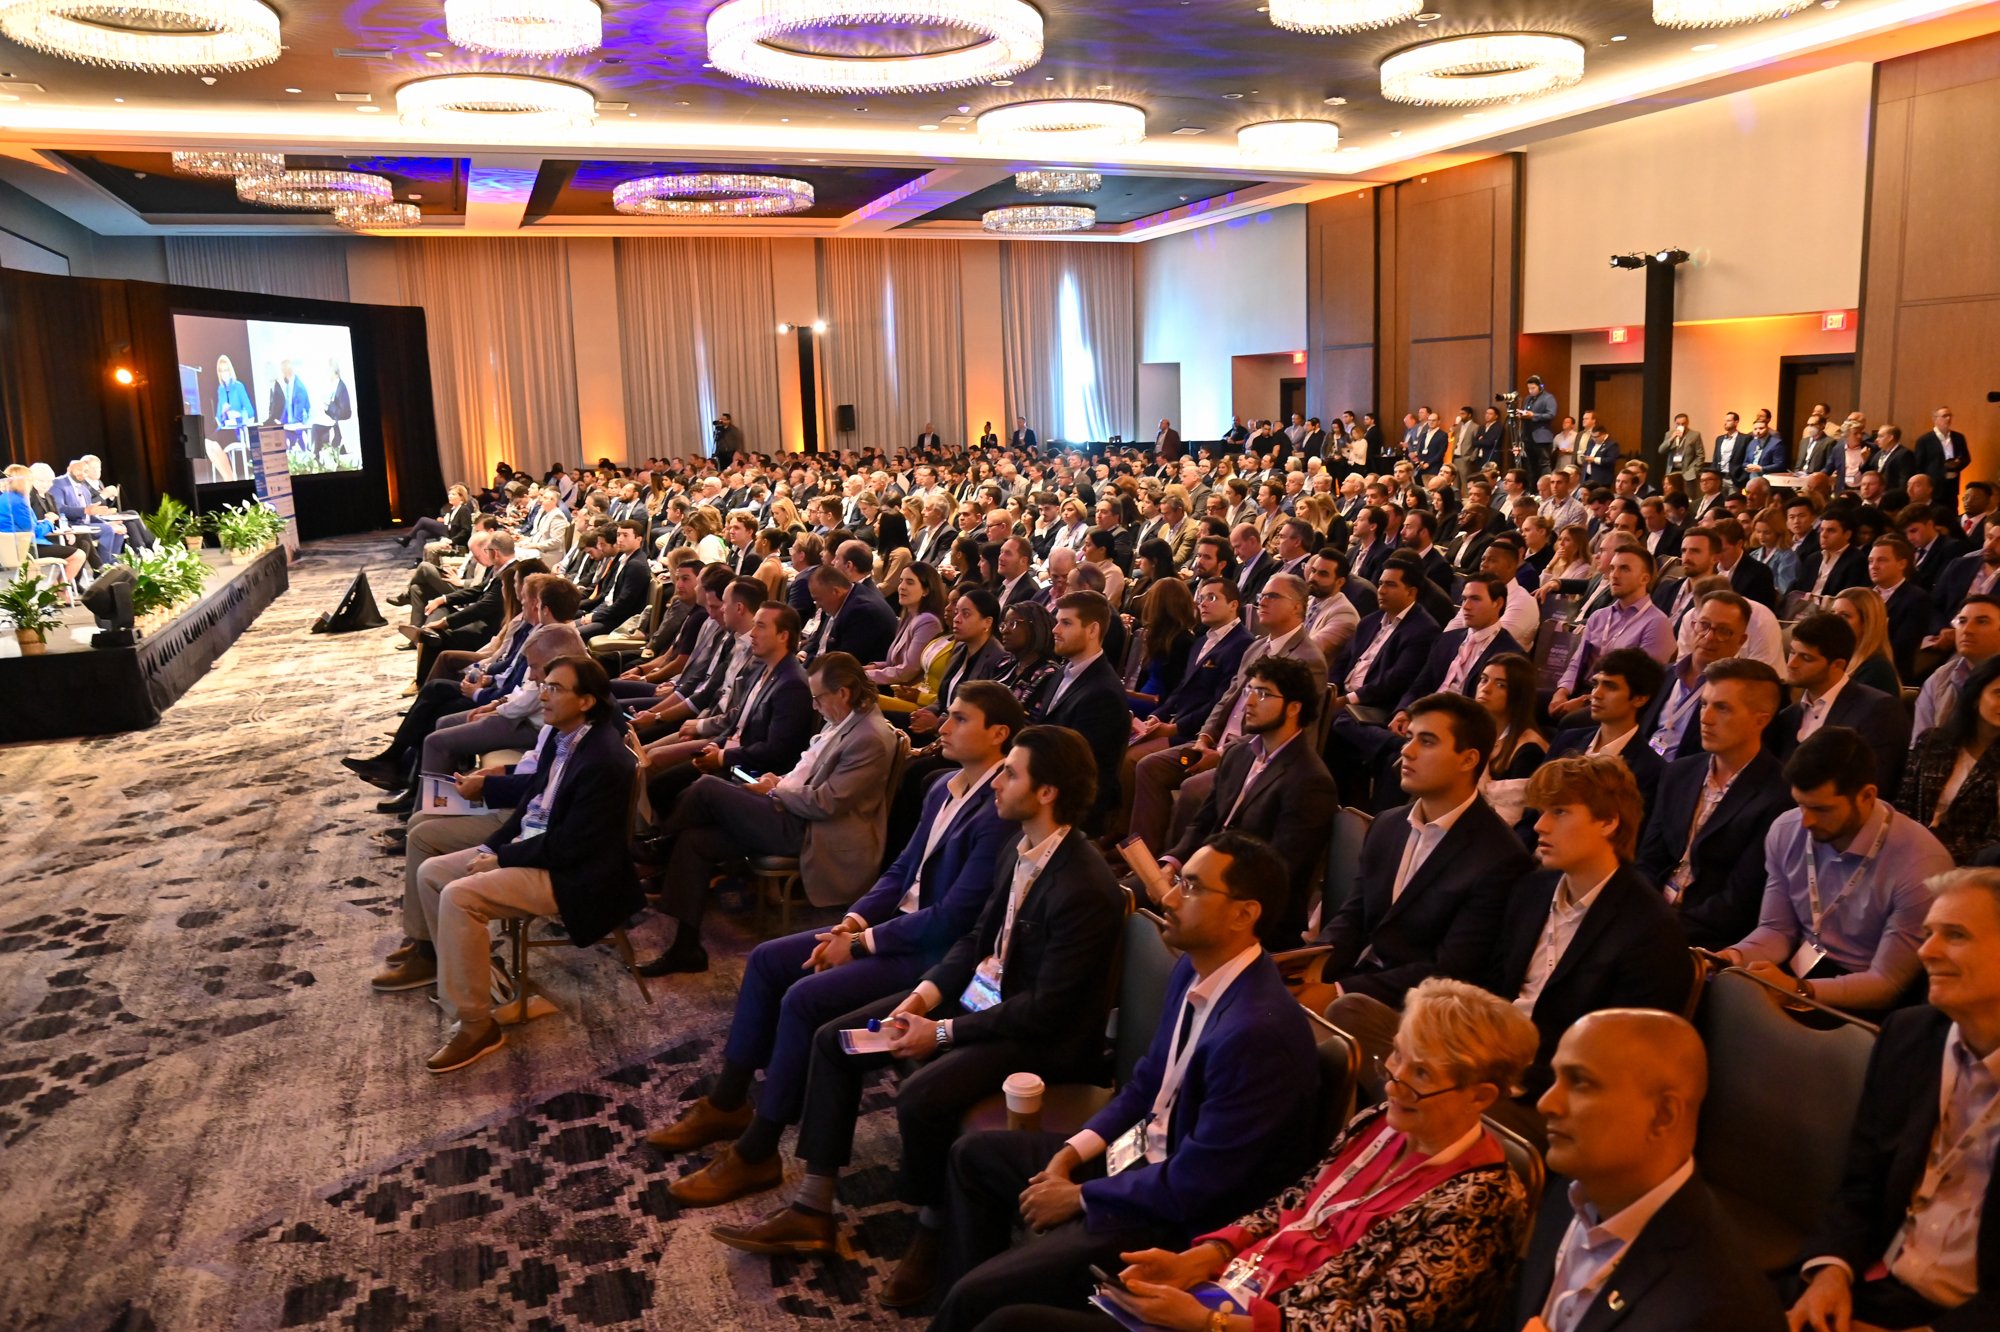 University of Miami Real Estate Impact Conference 2023 The Largest Edition Yet As Real Estate Leaders Discuss The State of Miami Real Estate 430.jpg